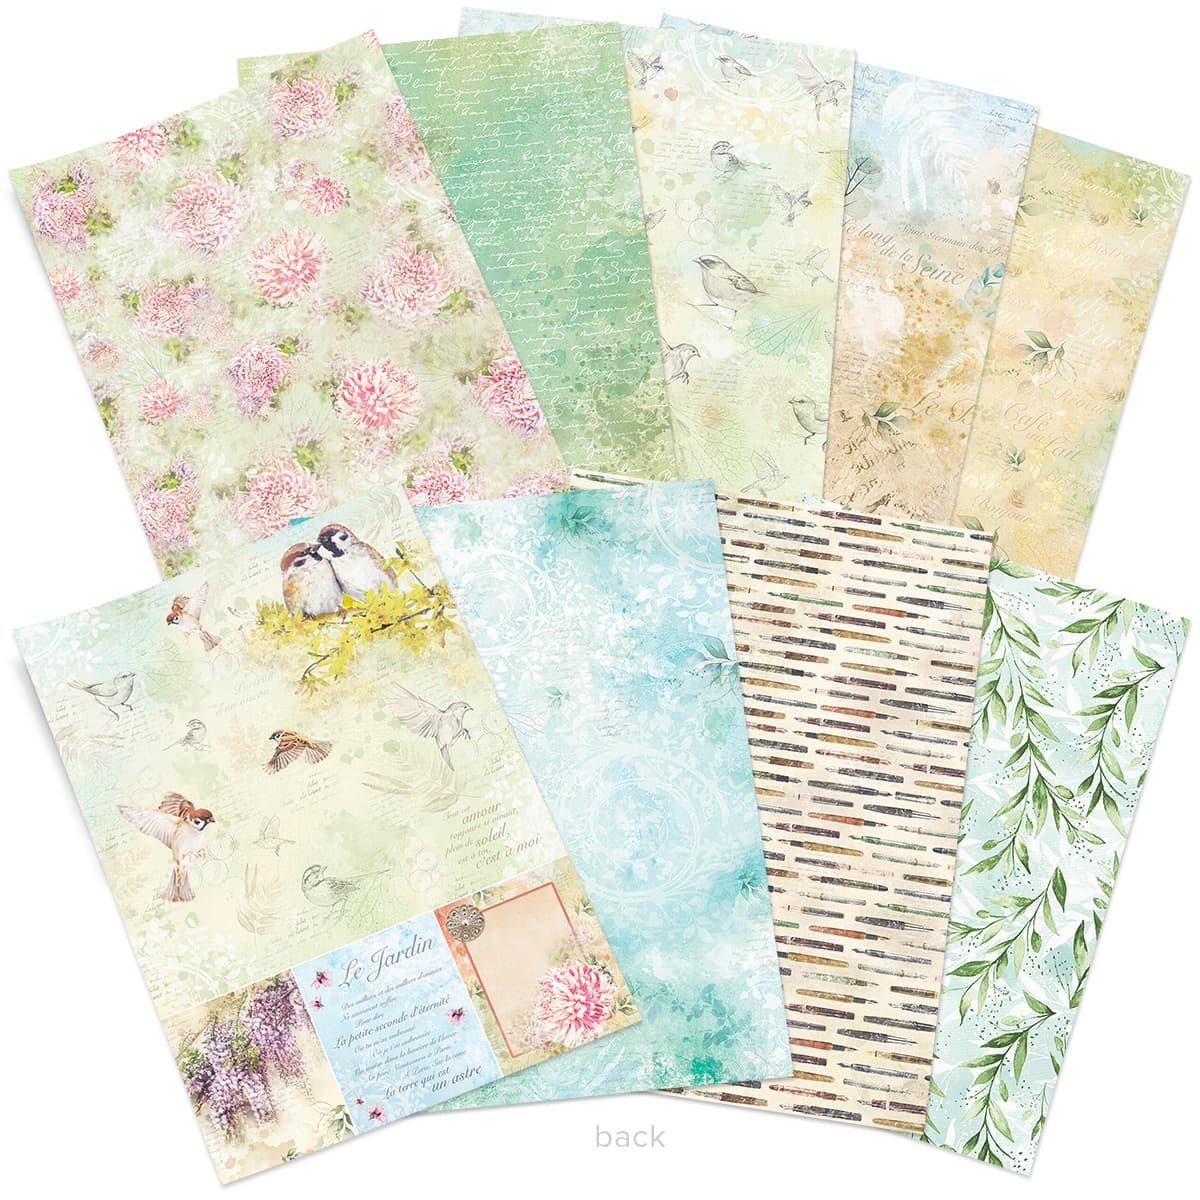 Ciao Bella - Notre Vie - Double Sided Paper - A4 - Pack of 9 Ciao Bella